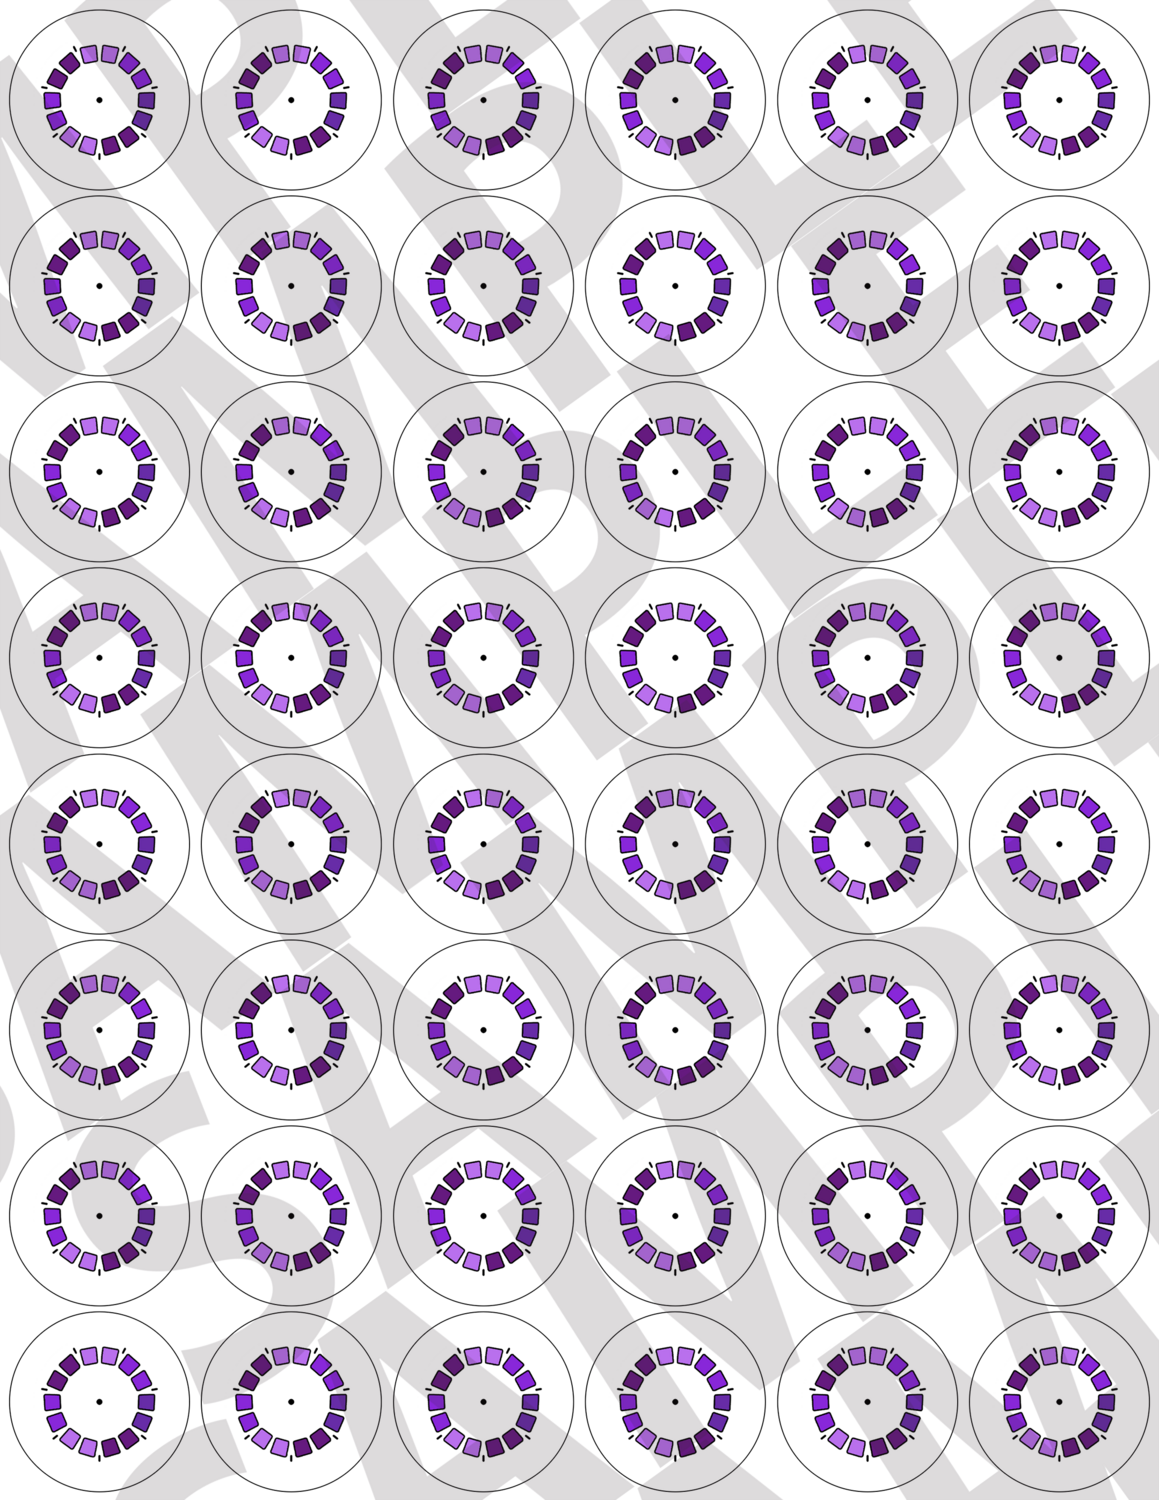 Purple - Inverted Viewfinders Button Sheet